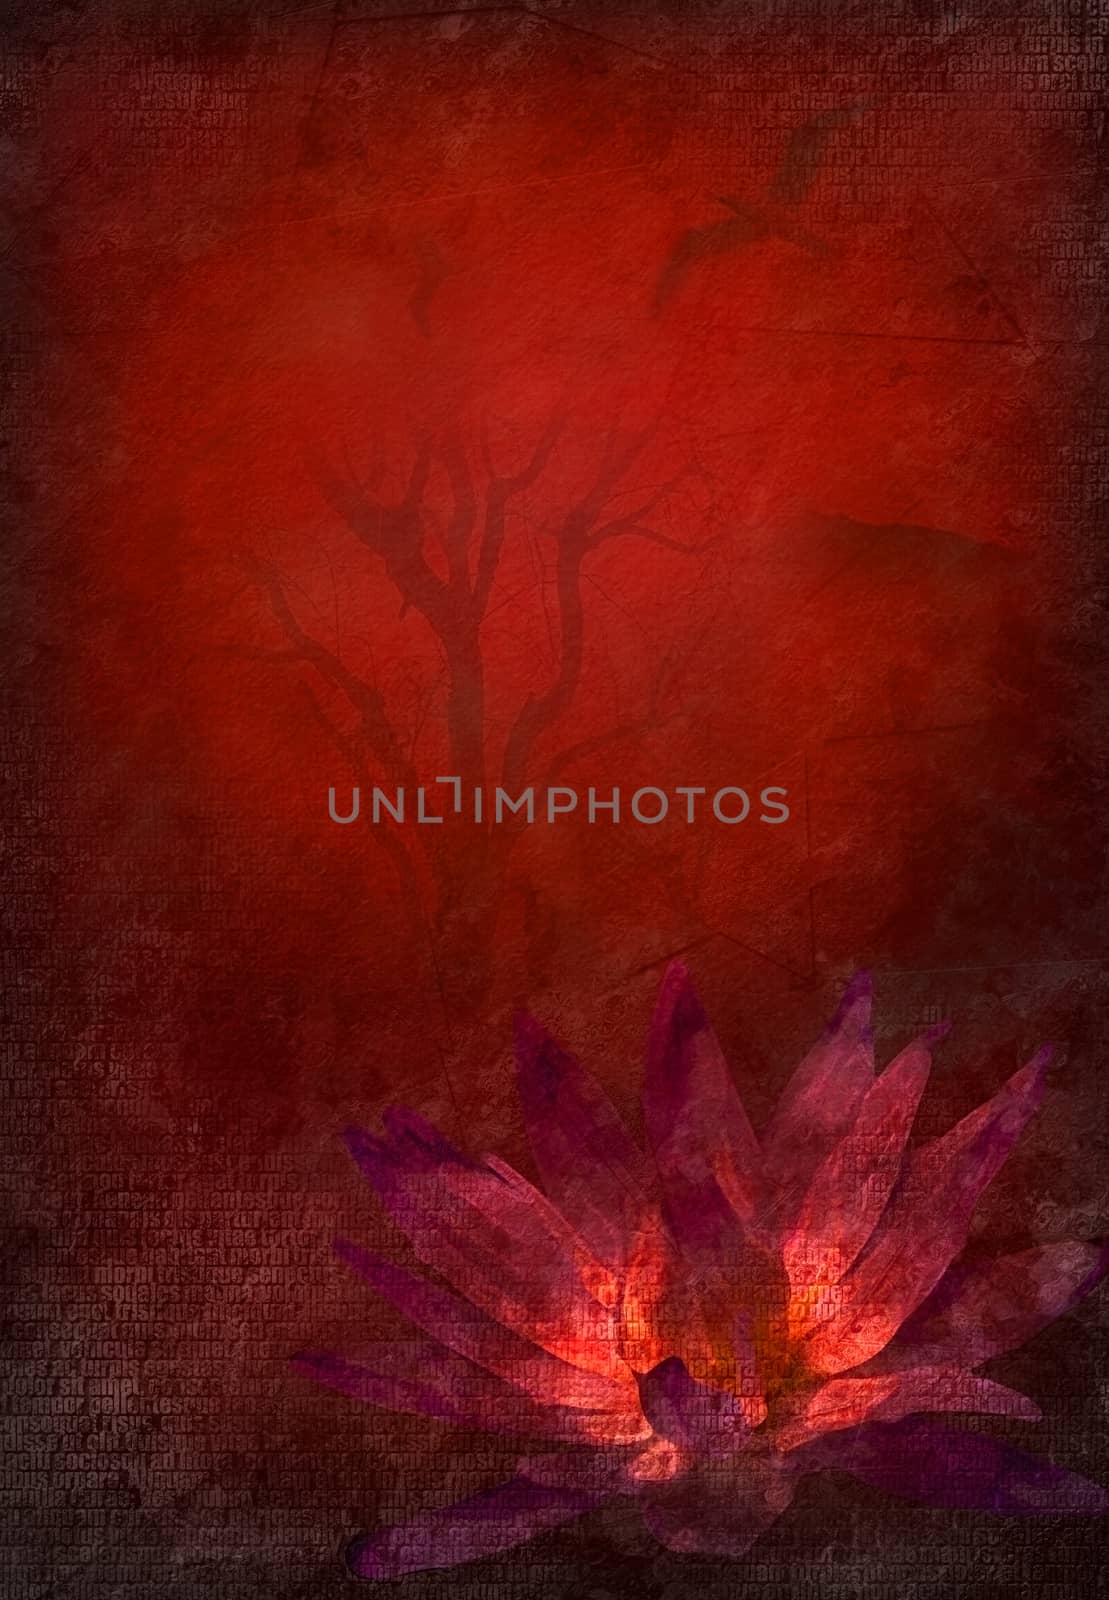 Modern abstract art. Red glowing lotus flower